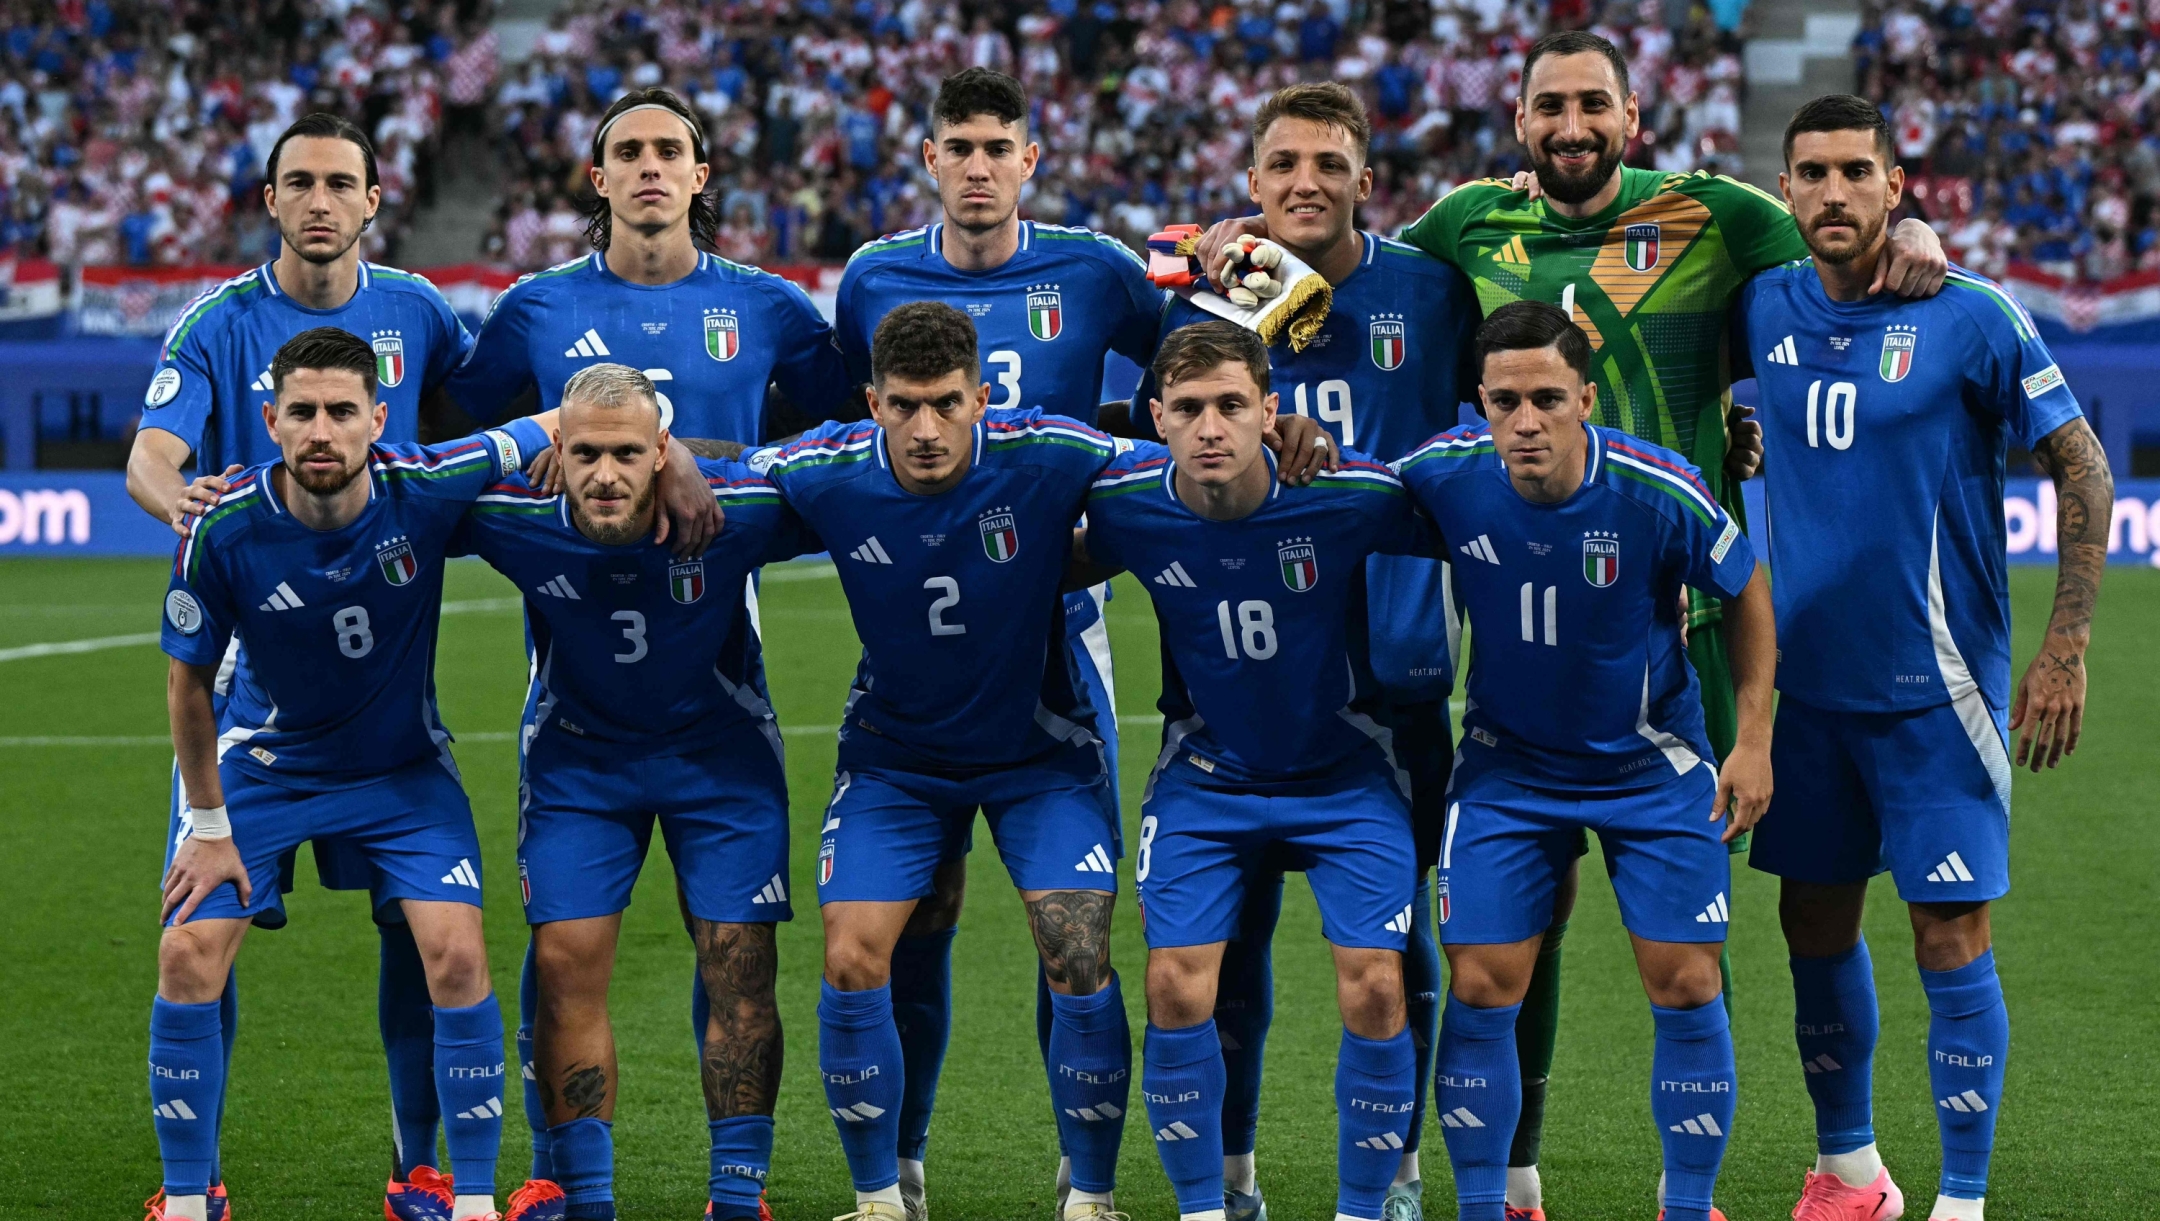 (From L) Italy's defender #13 Matteo Darmian, Italy's midfielder #08 Jorginho, Italy's defender #03 Federico Dimarco, Italy's defender #05 Riccardo Calafiori, Italy's defender #02 Giovanni Di Lorenzo, Italy's defender #23 Alessandro Bastoni, Italy's midfielder #18 Nicolo Barella, Italy's forward #19 Mateo Retegui, Italy's forward #11 Giacomo Raspadori, Italy's goalkeeper #01 Gianluigi Donnarumma and Italy's midfielder #10 Lorenzo Pellegrini pose for a team photo ahead of kick-off in the UEFA Euro 2024 Group B football match between the Croatia and Italy at the Leipzig Stadium in Leipzig on June 24, 2024. (Photo by GABRIEL BOUYS / AFP)